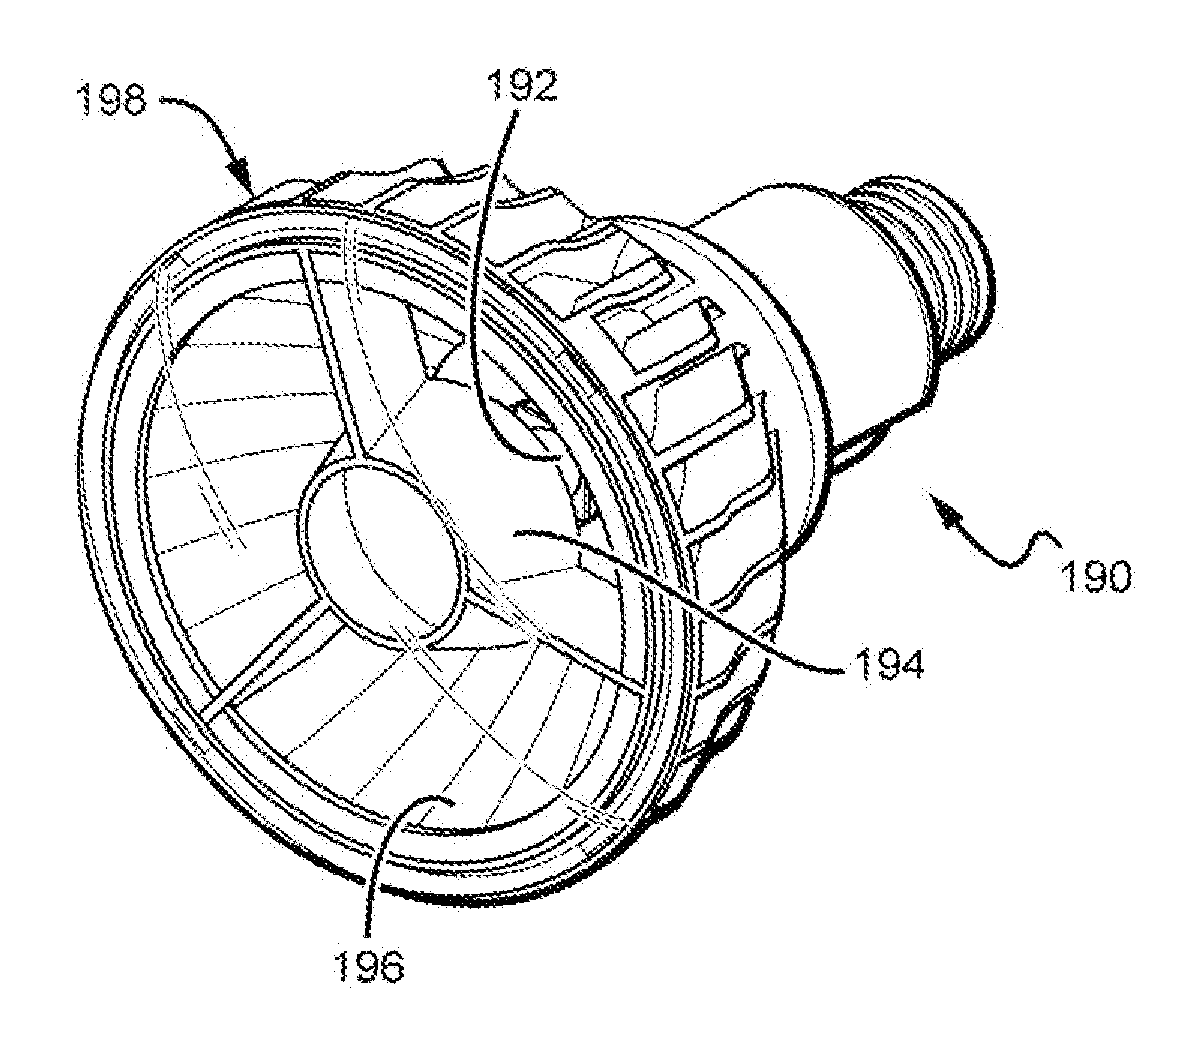 Light emitting diode primary optic for beam shaping